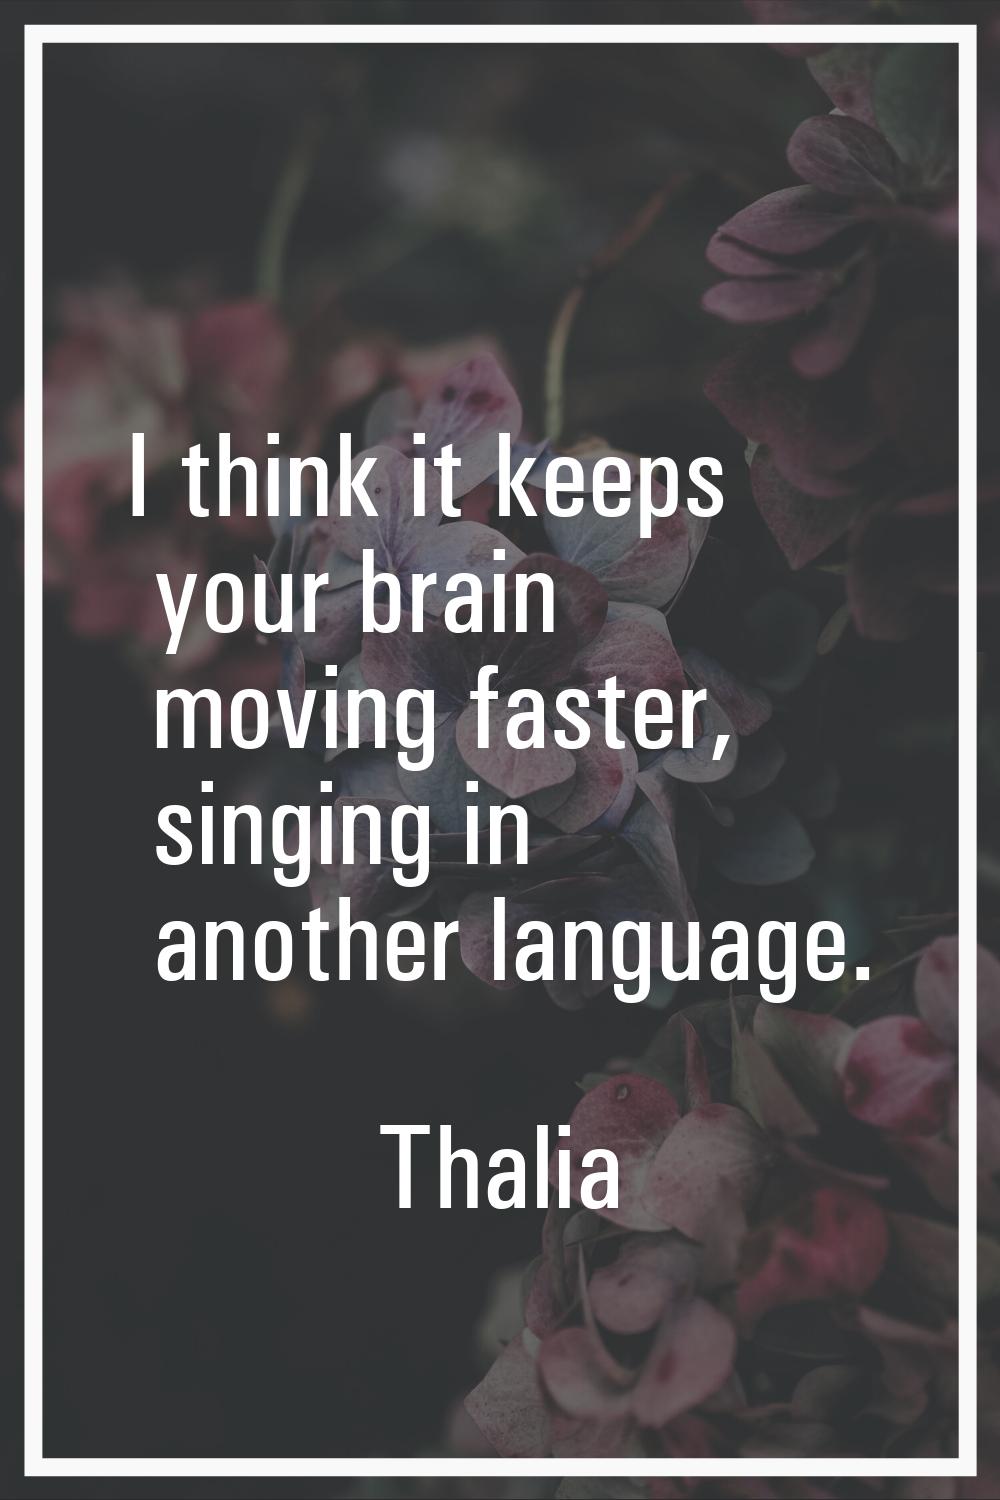 I think it keeps your brain moving faster, singing in another language.